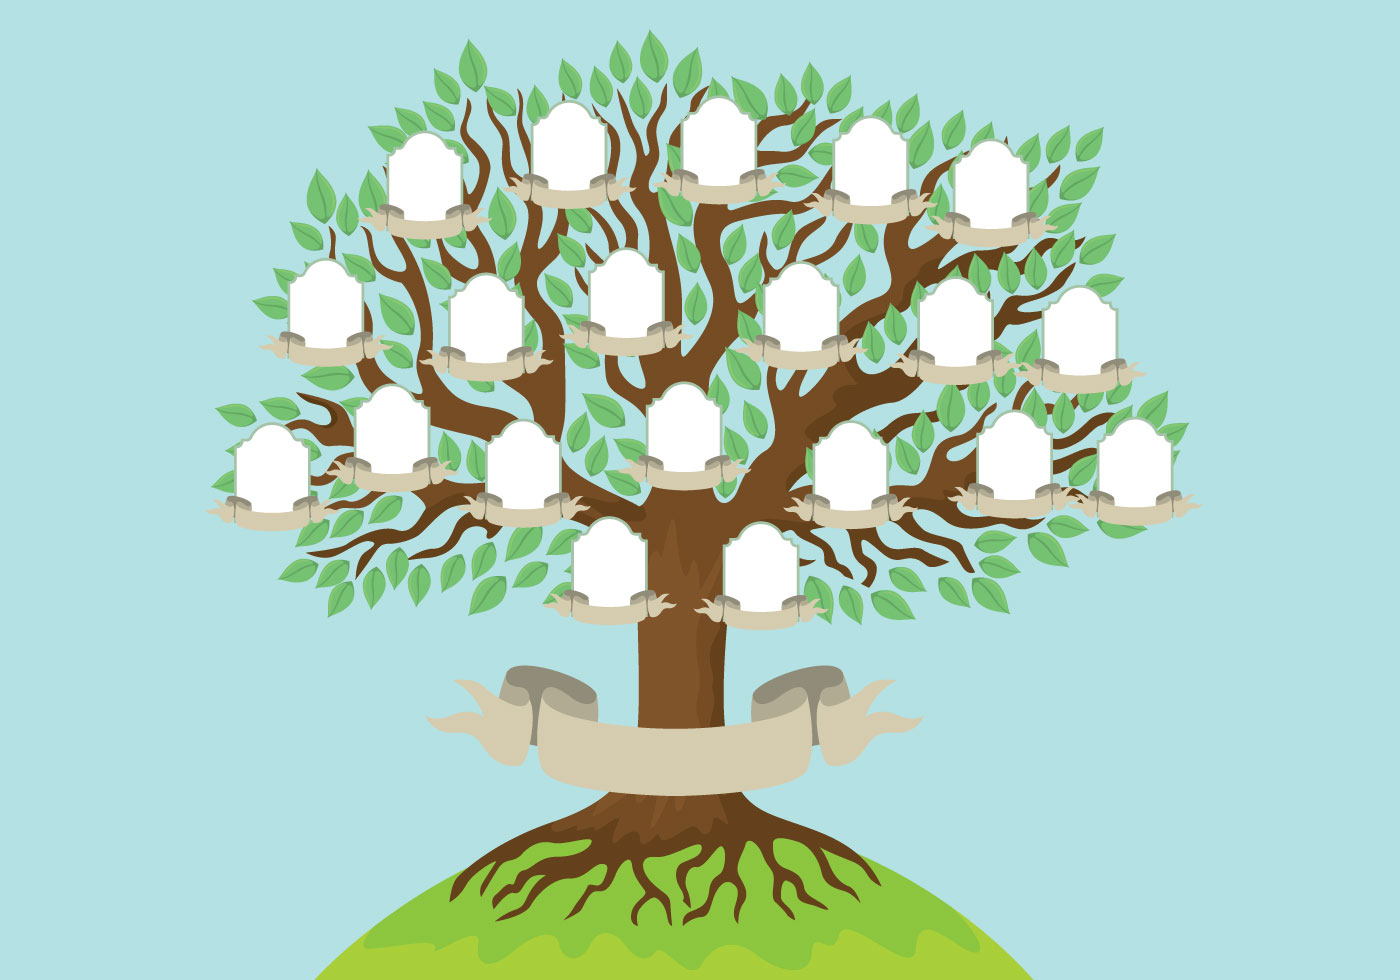 Download Family tree template - Download Free Vectors, Clipart ...